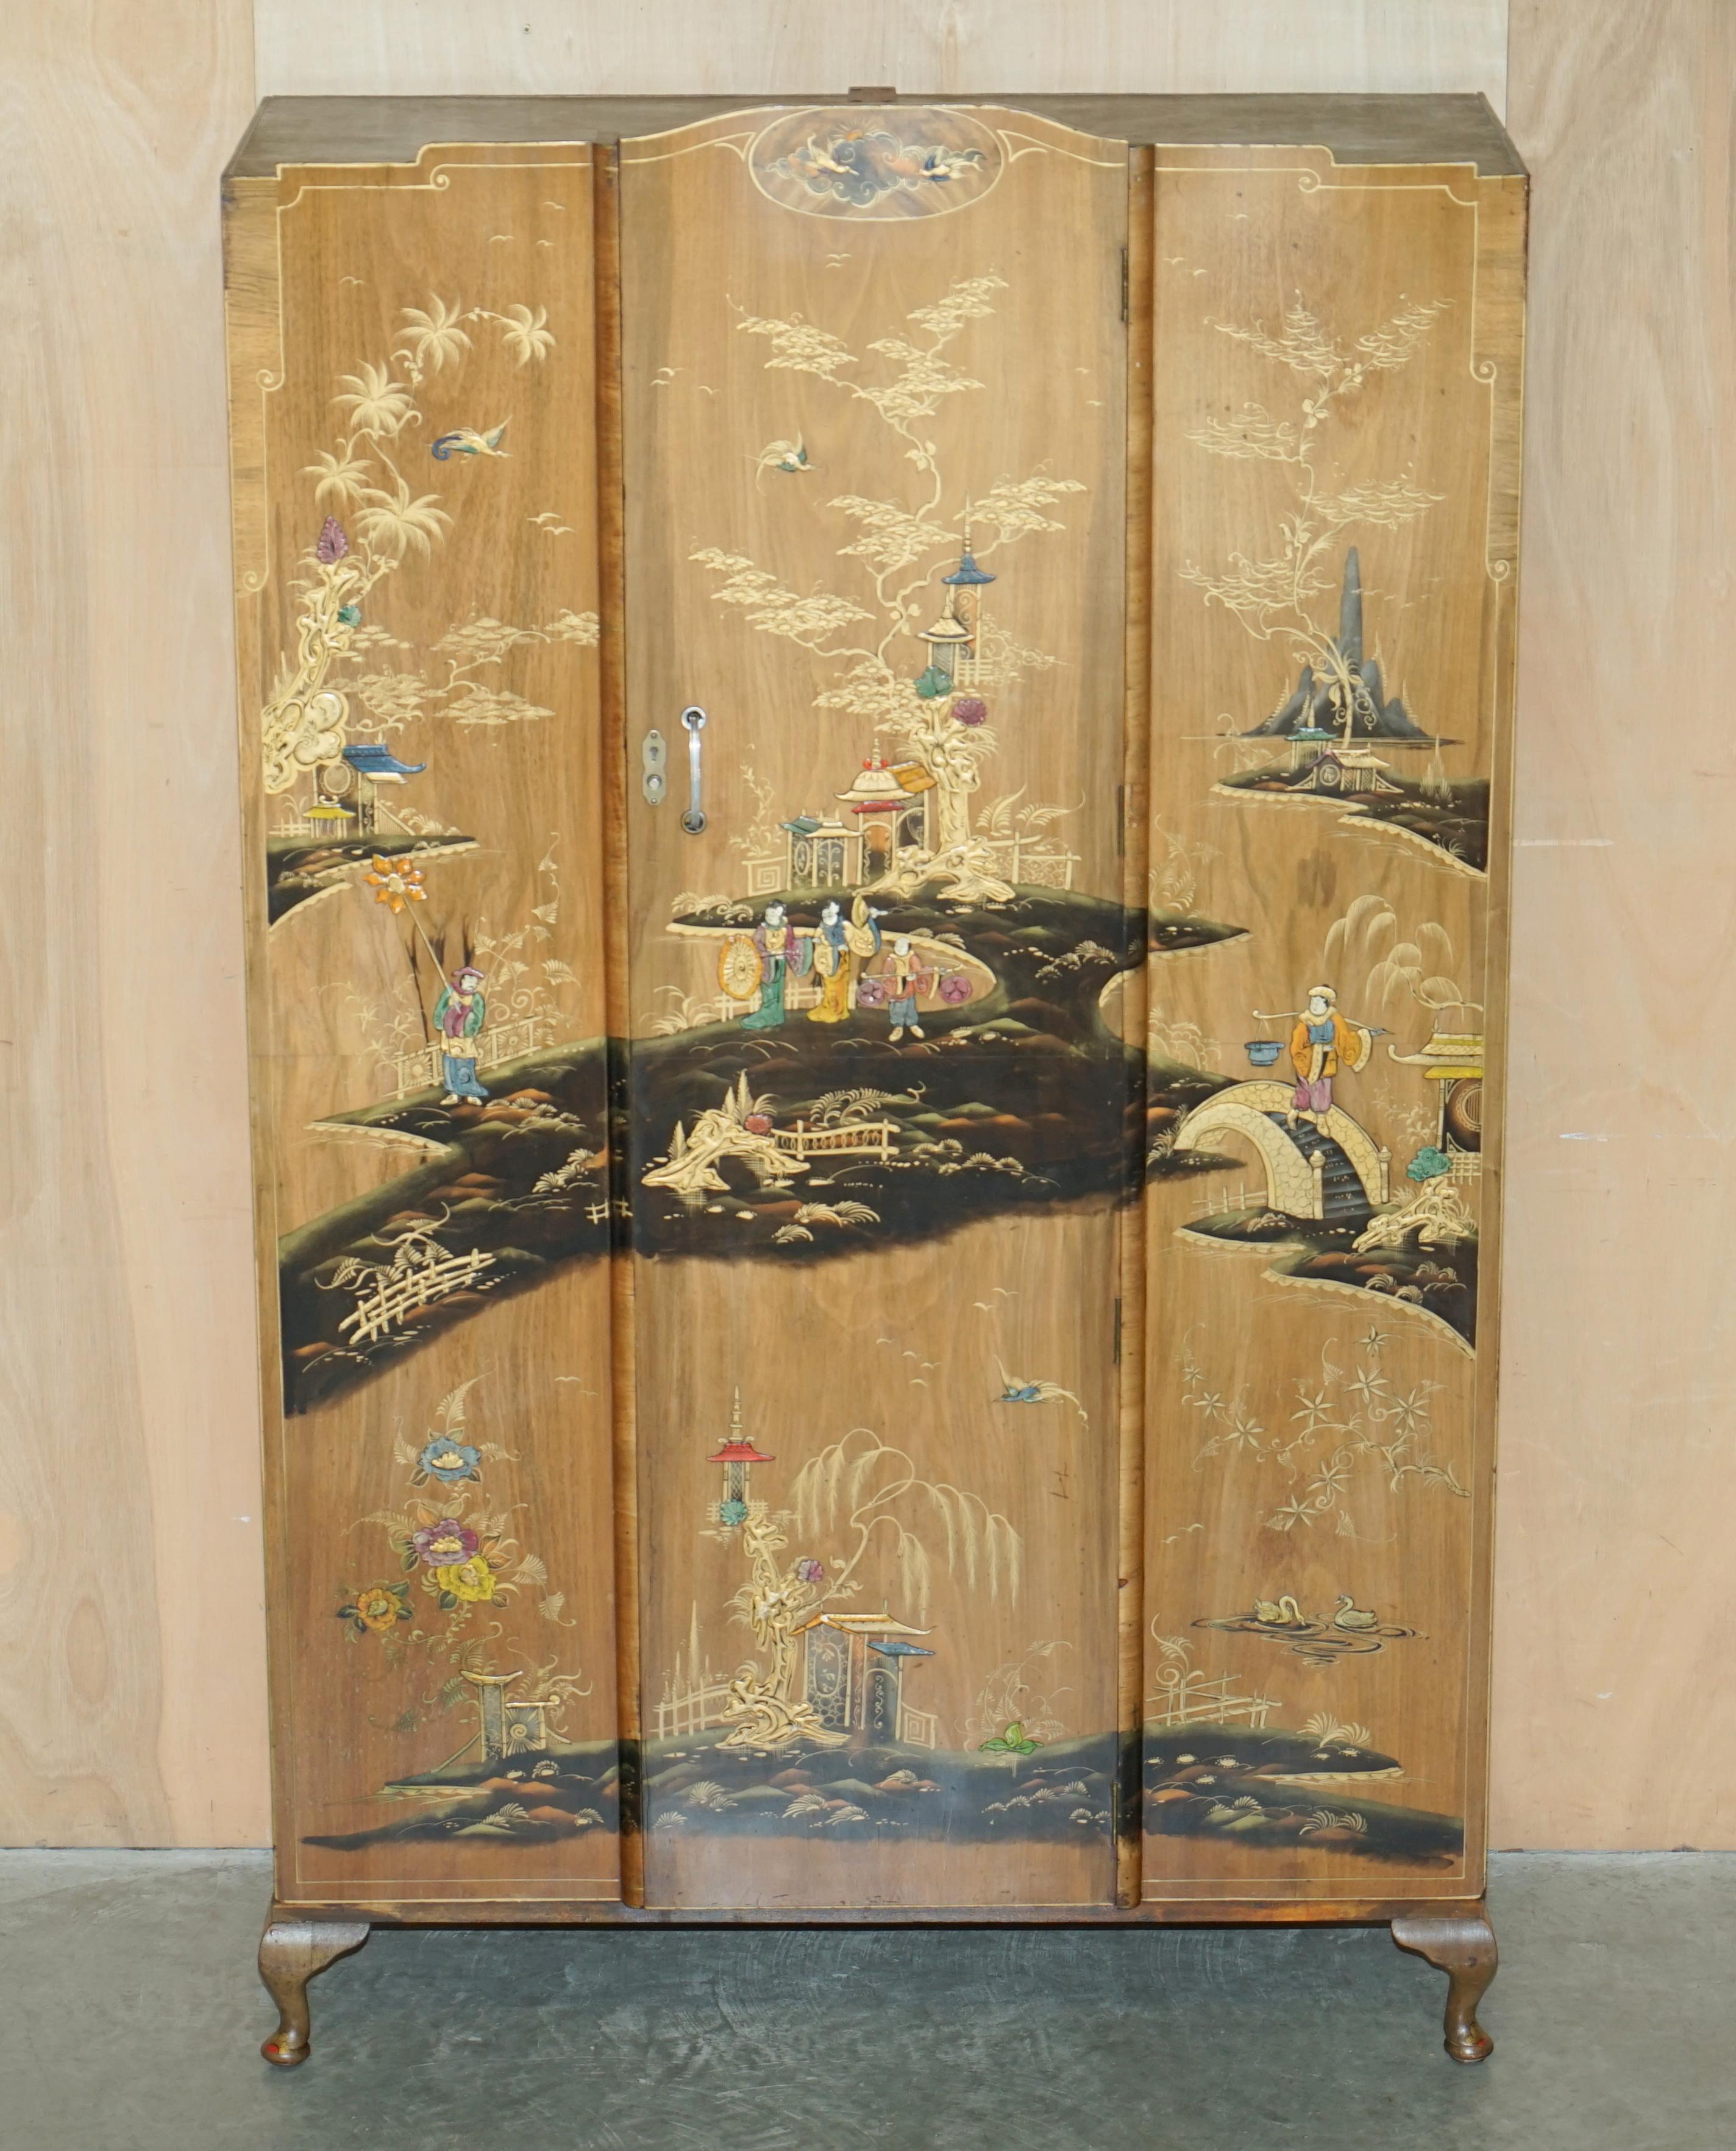 Royal House Antiques

Royal House Antiques is delighted to offer for sale this stunning large Chinese Export, Chinoiserie, Walnut & hand painted double wardrobe which is part of a suite

Please note the delivery fee listed is just a guide, it covers